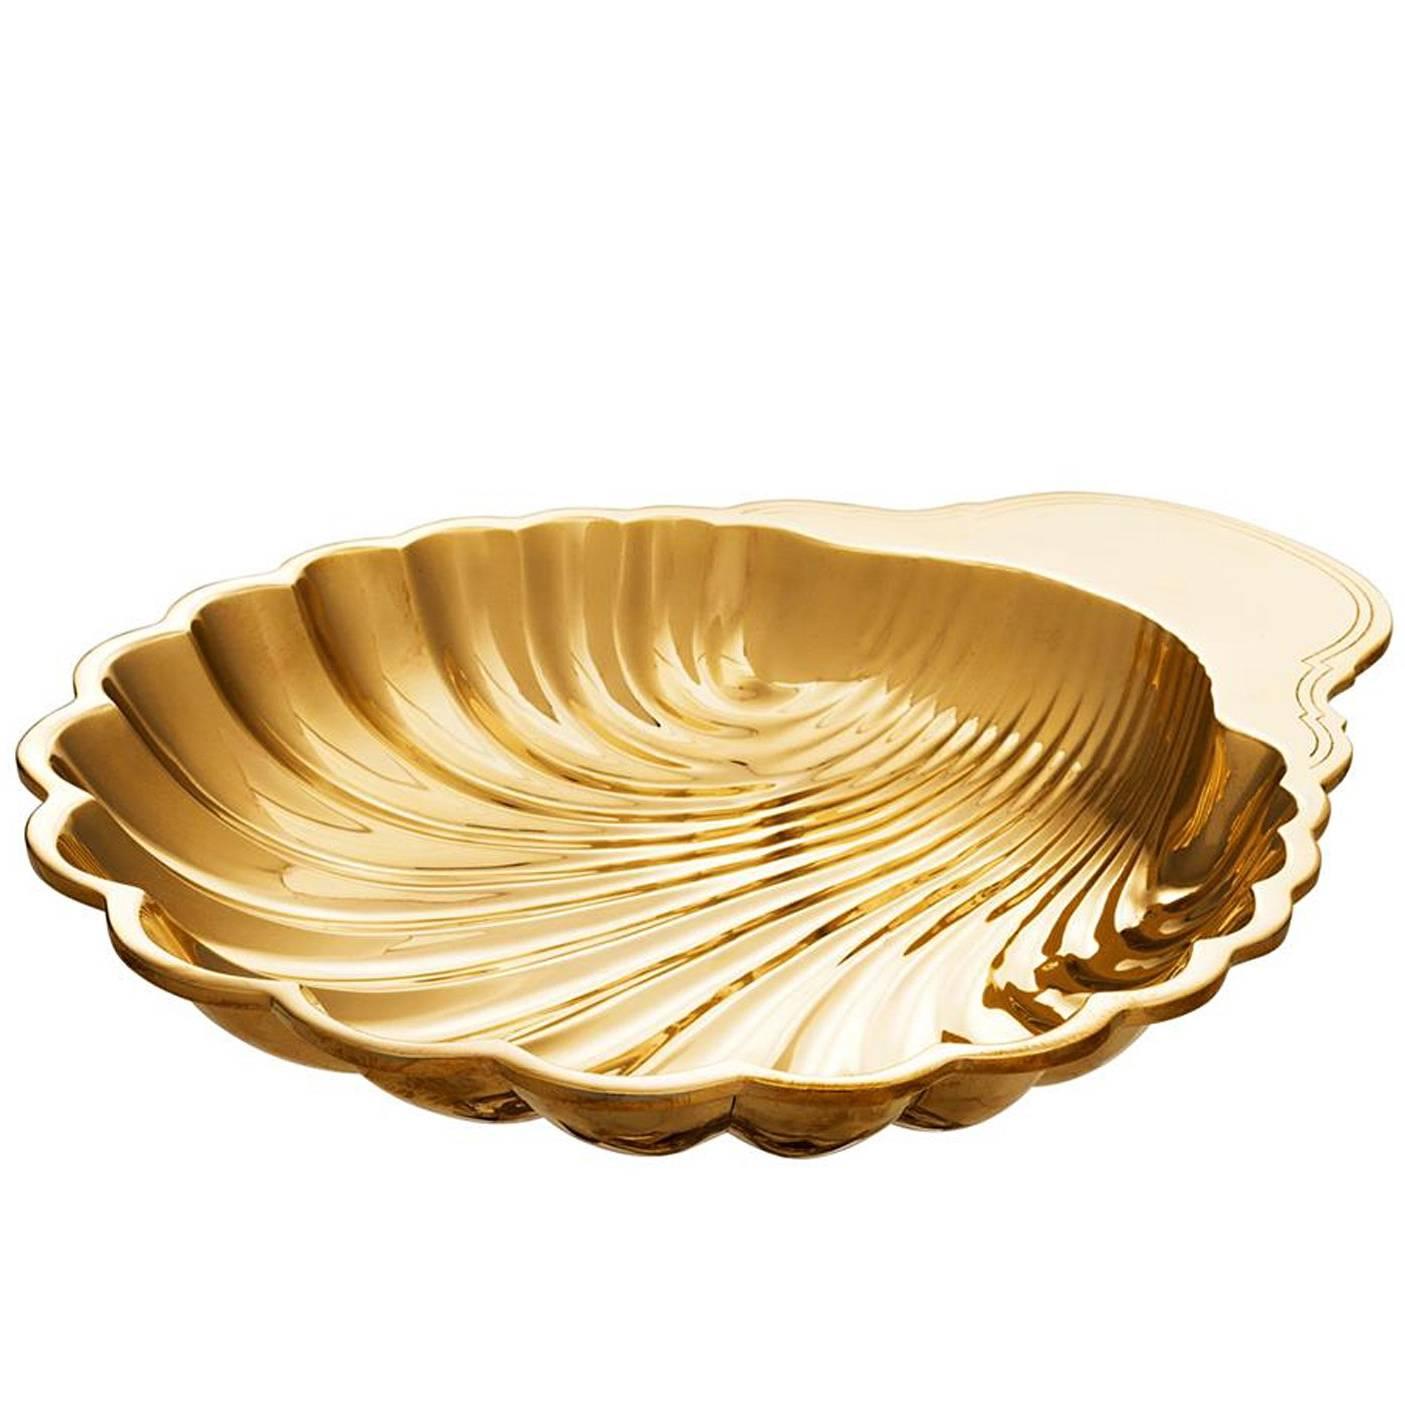 Shell Tray in Polished Brass or in Nickel Finish